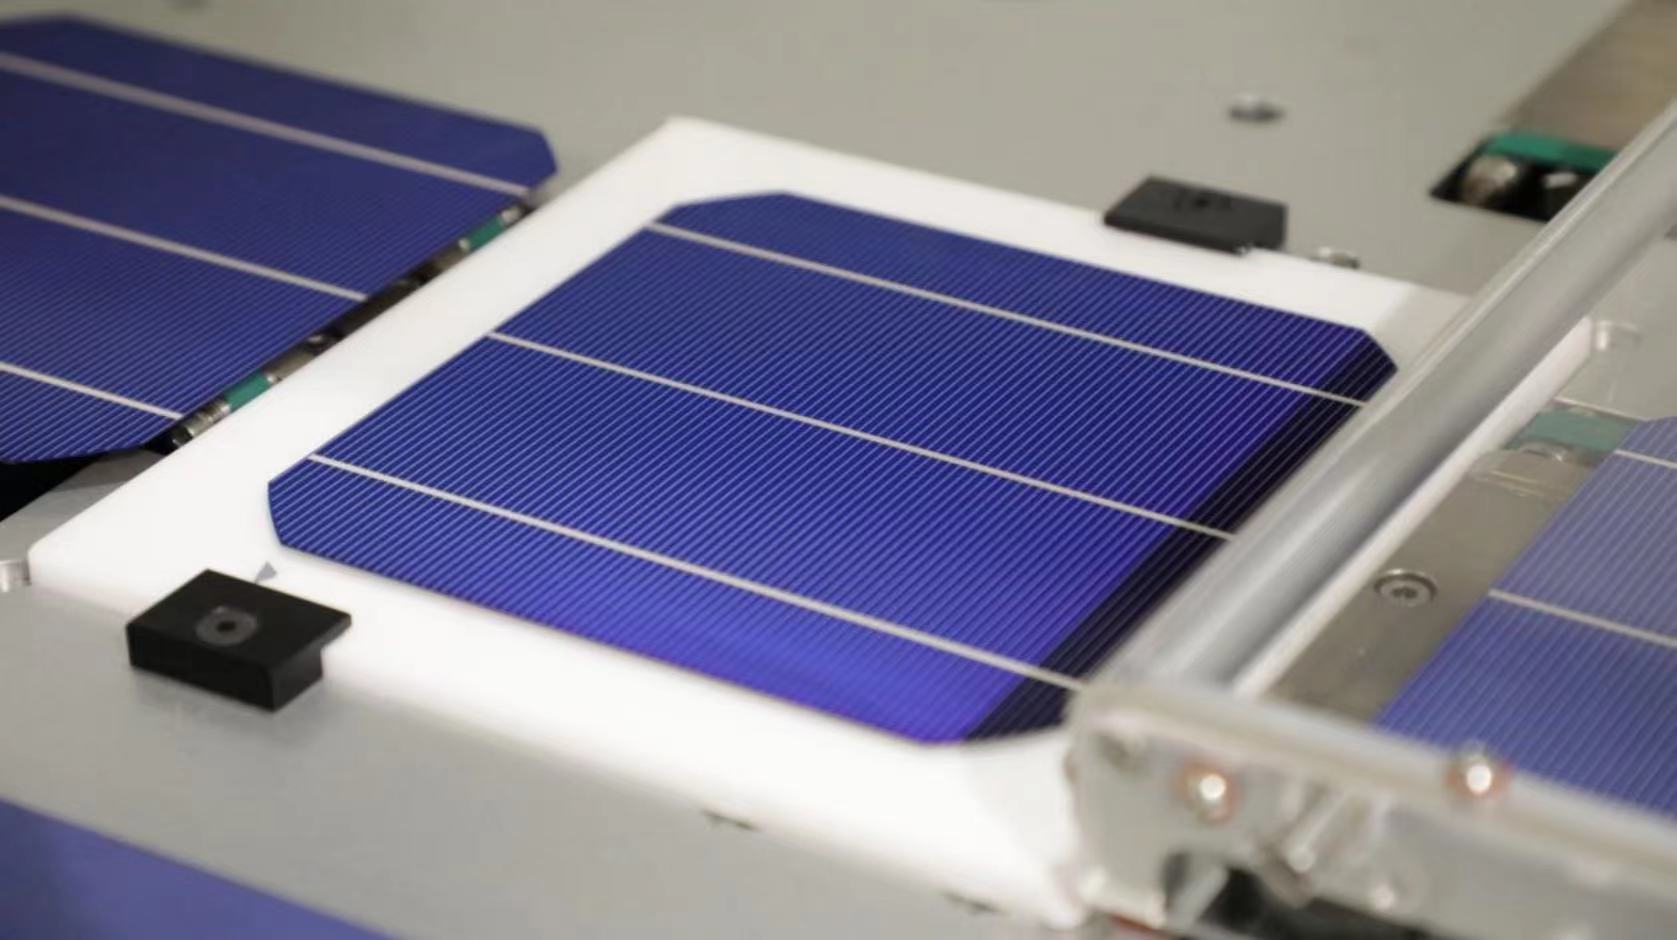 Fabricating Different Types of Photovoltaic Cells